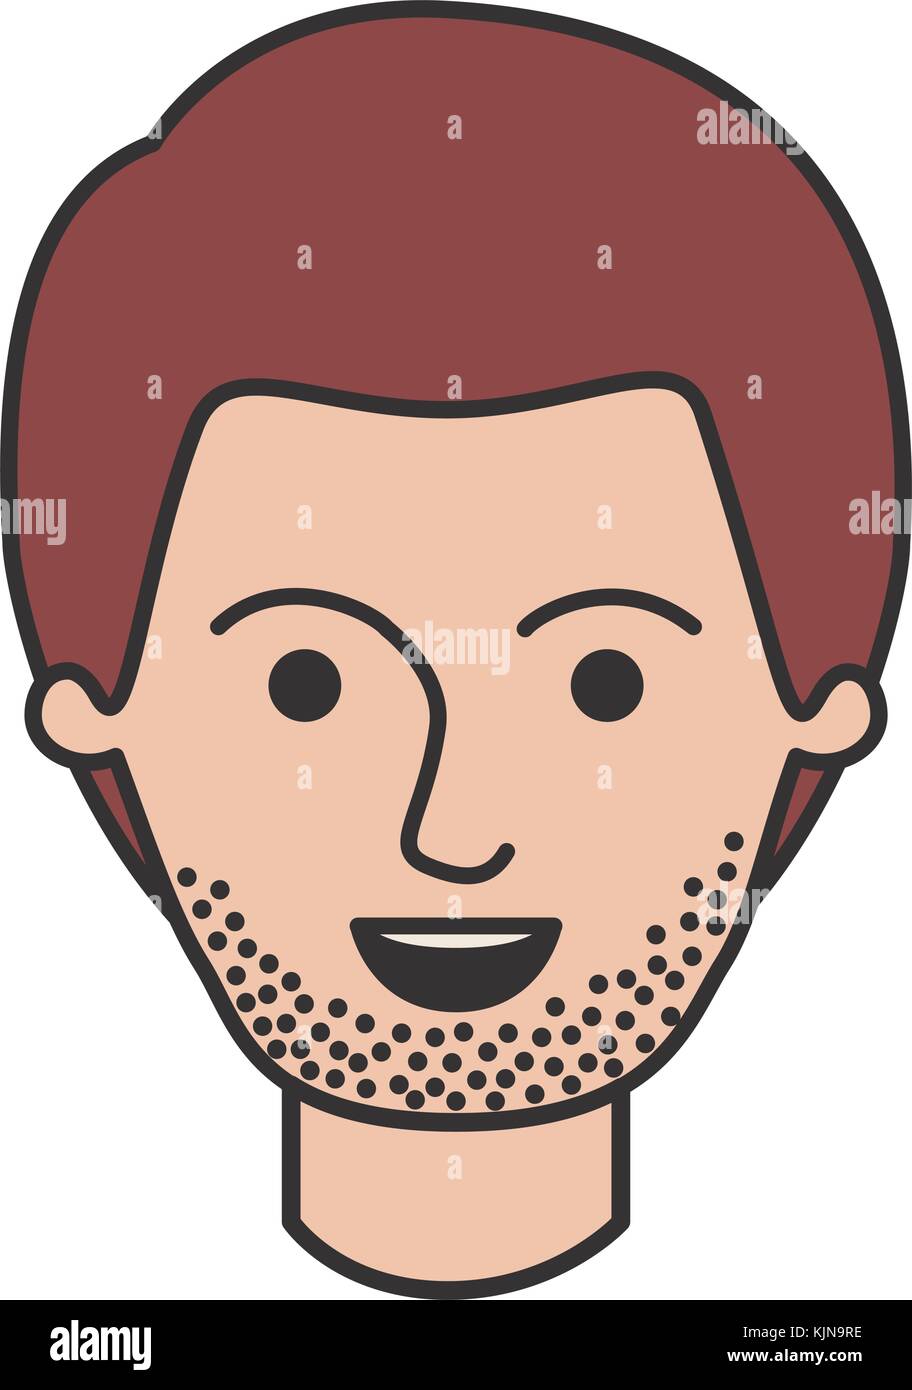 male face with short hair and stubble beard in colorful silhouette Stock Vector